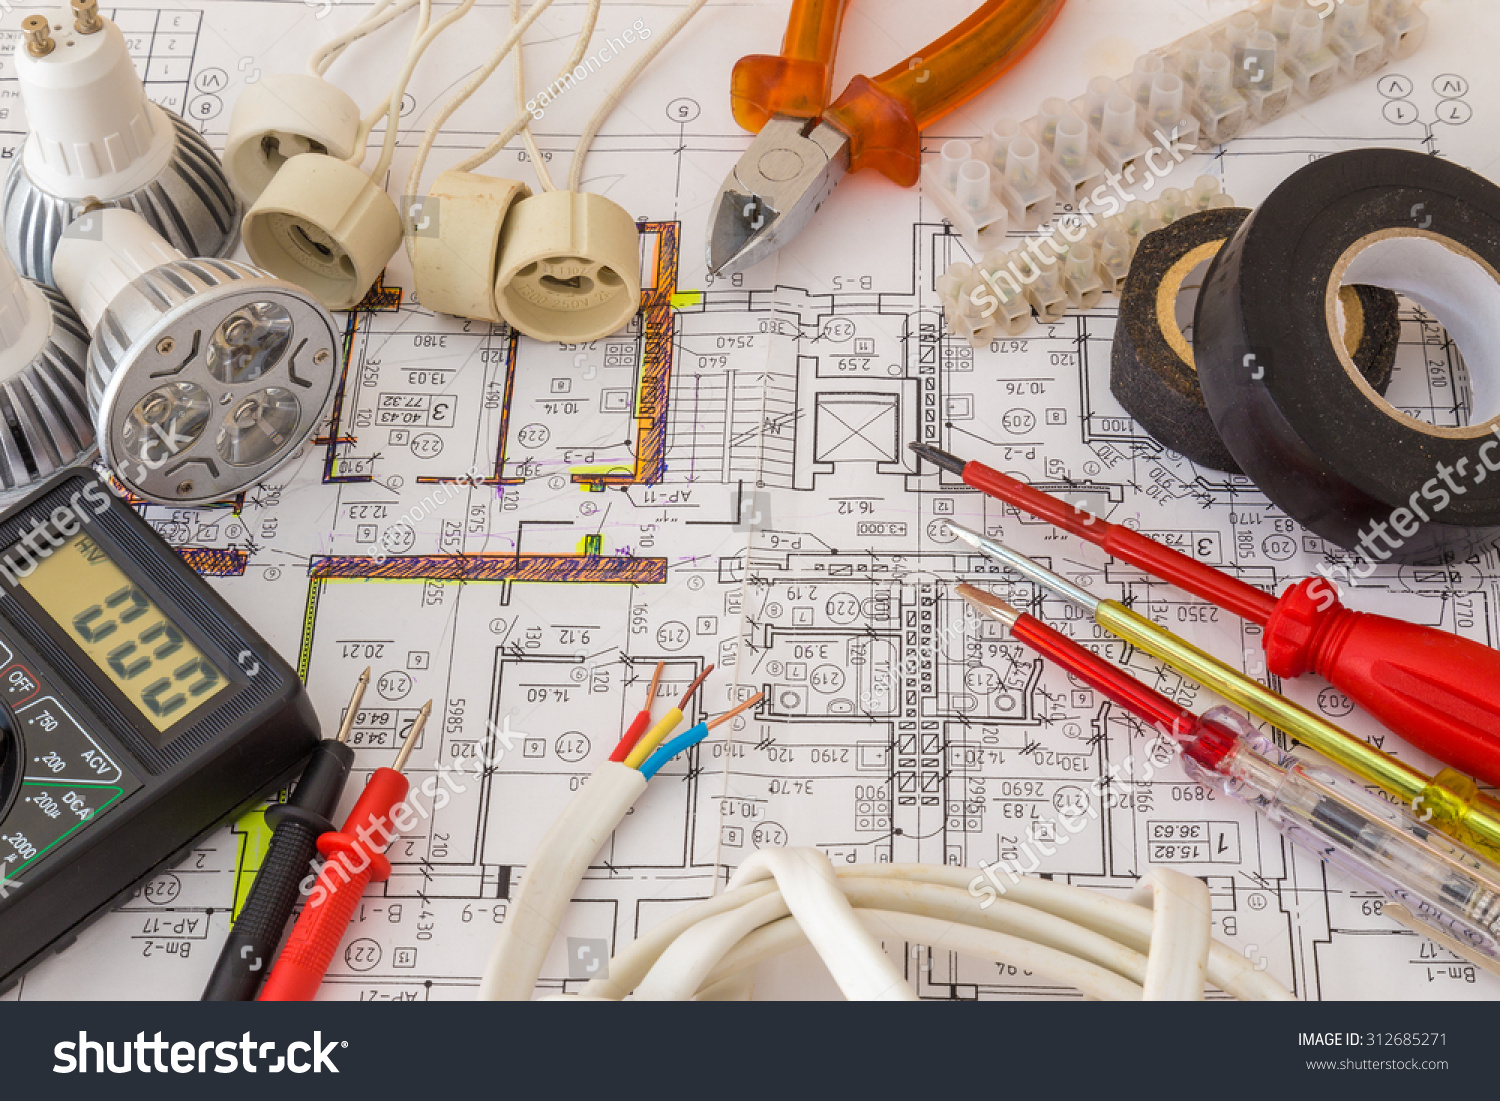 Still Life Of Electrical Components Arranged On Plans #312685271